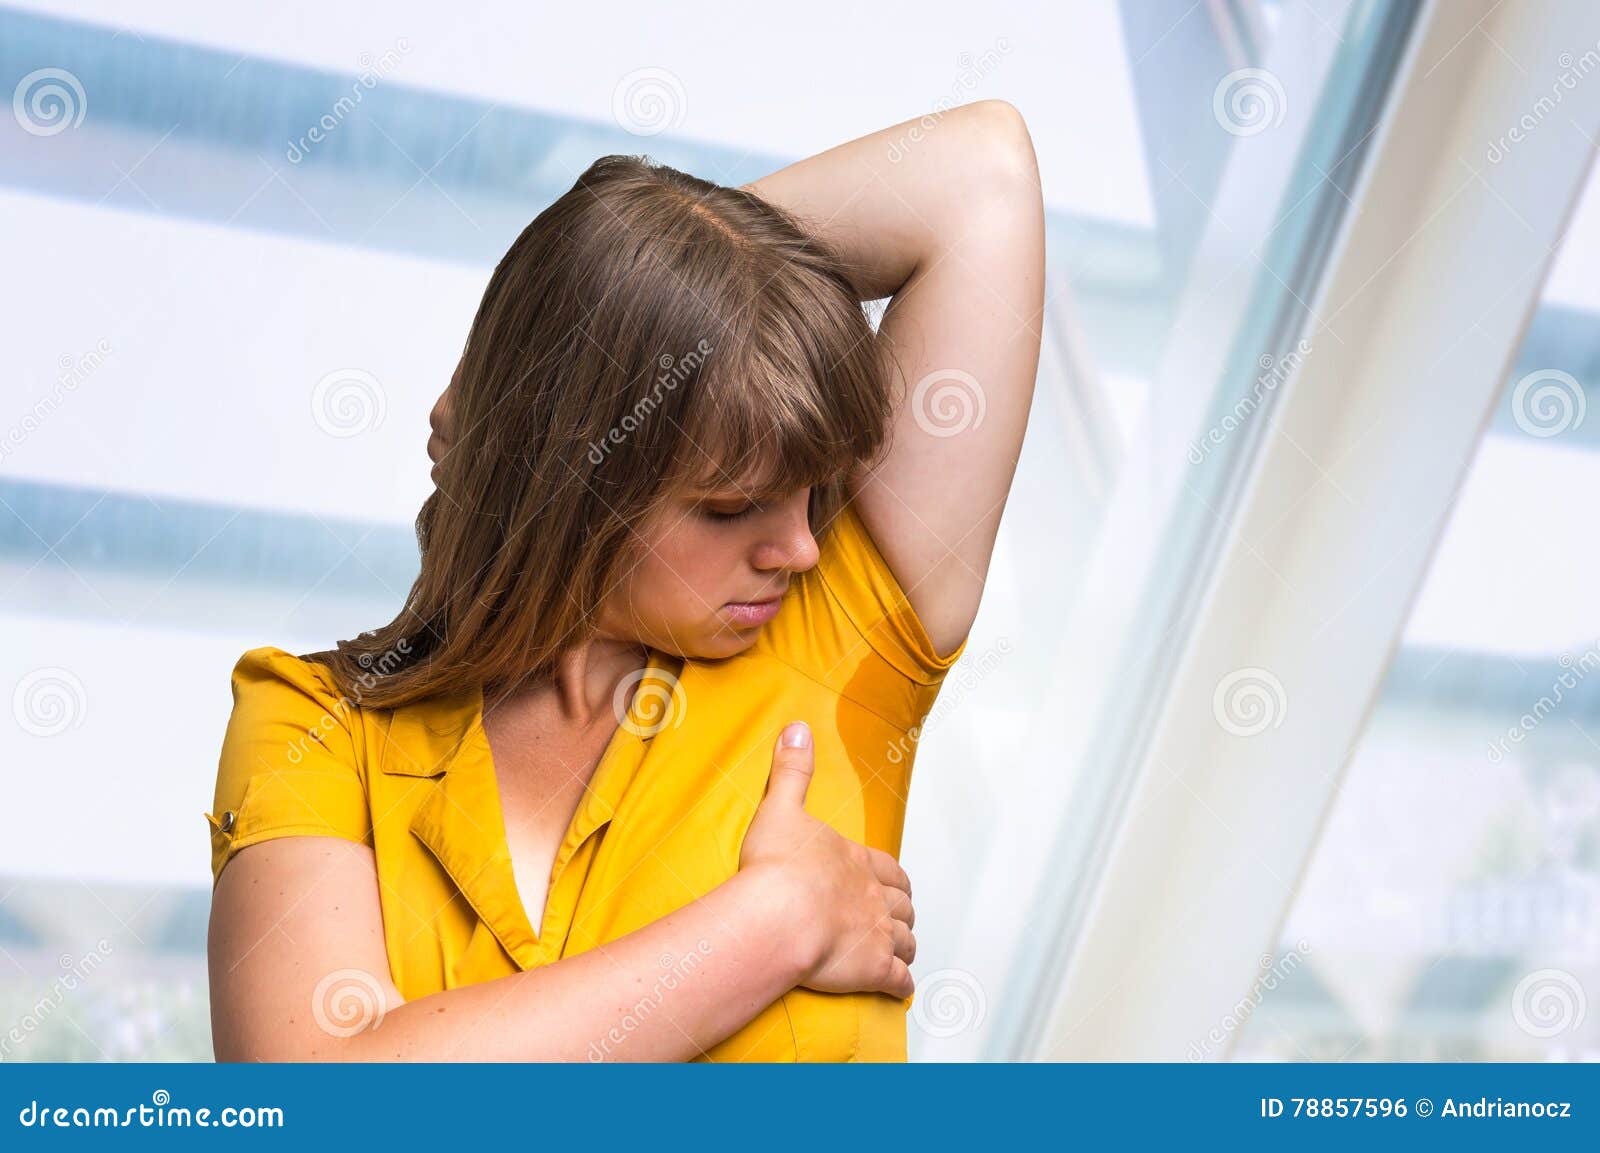 woman with sweating under armpit in yellow dress